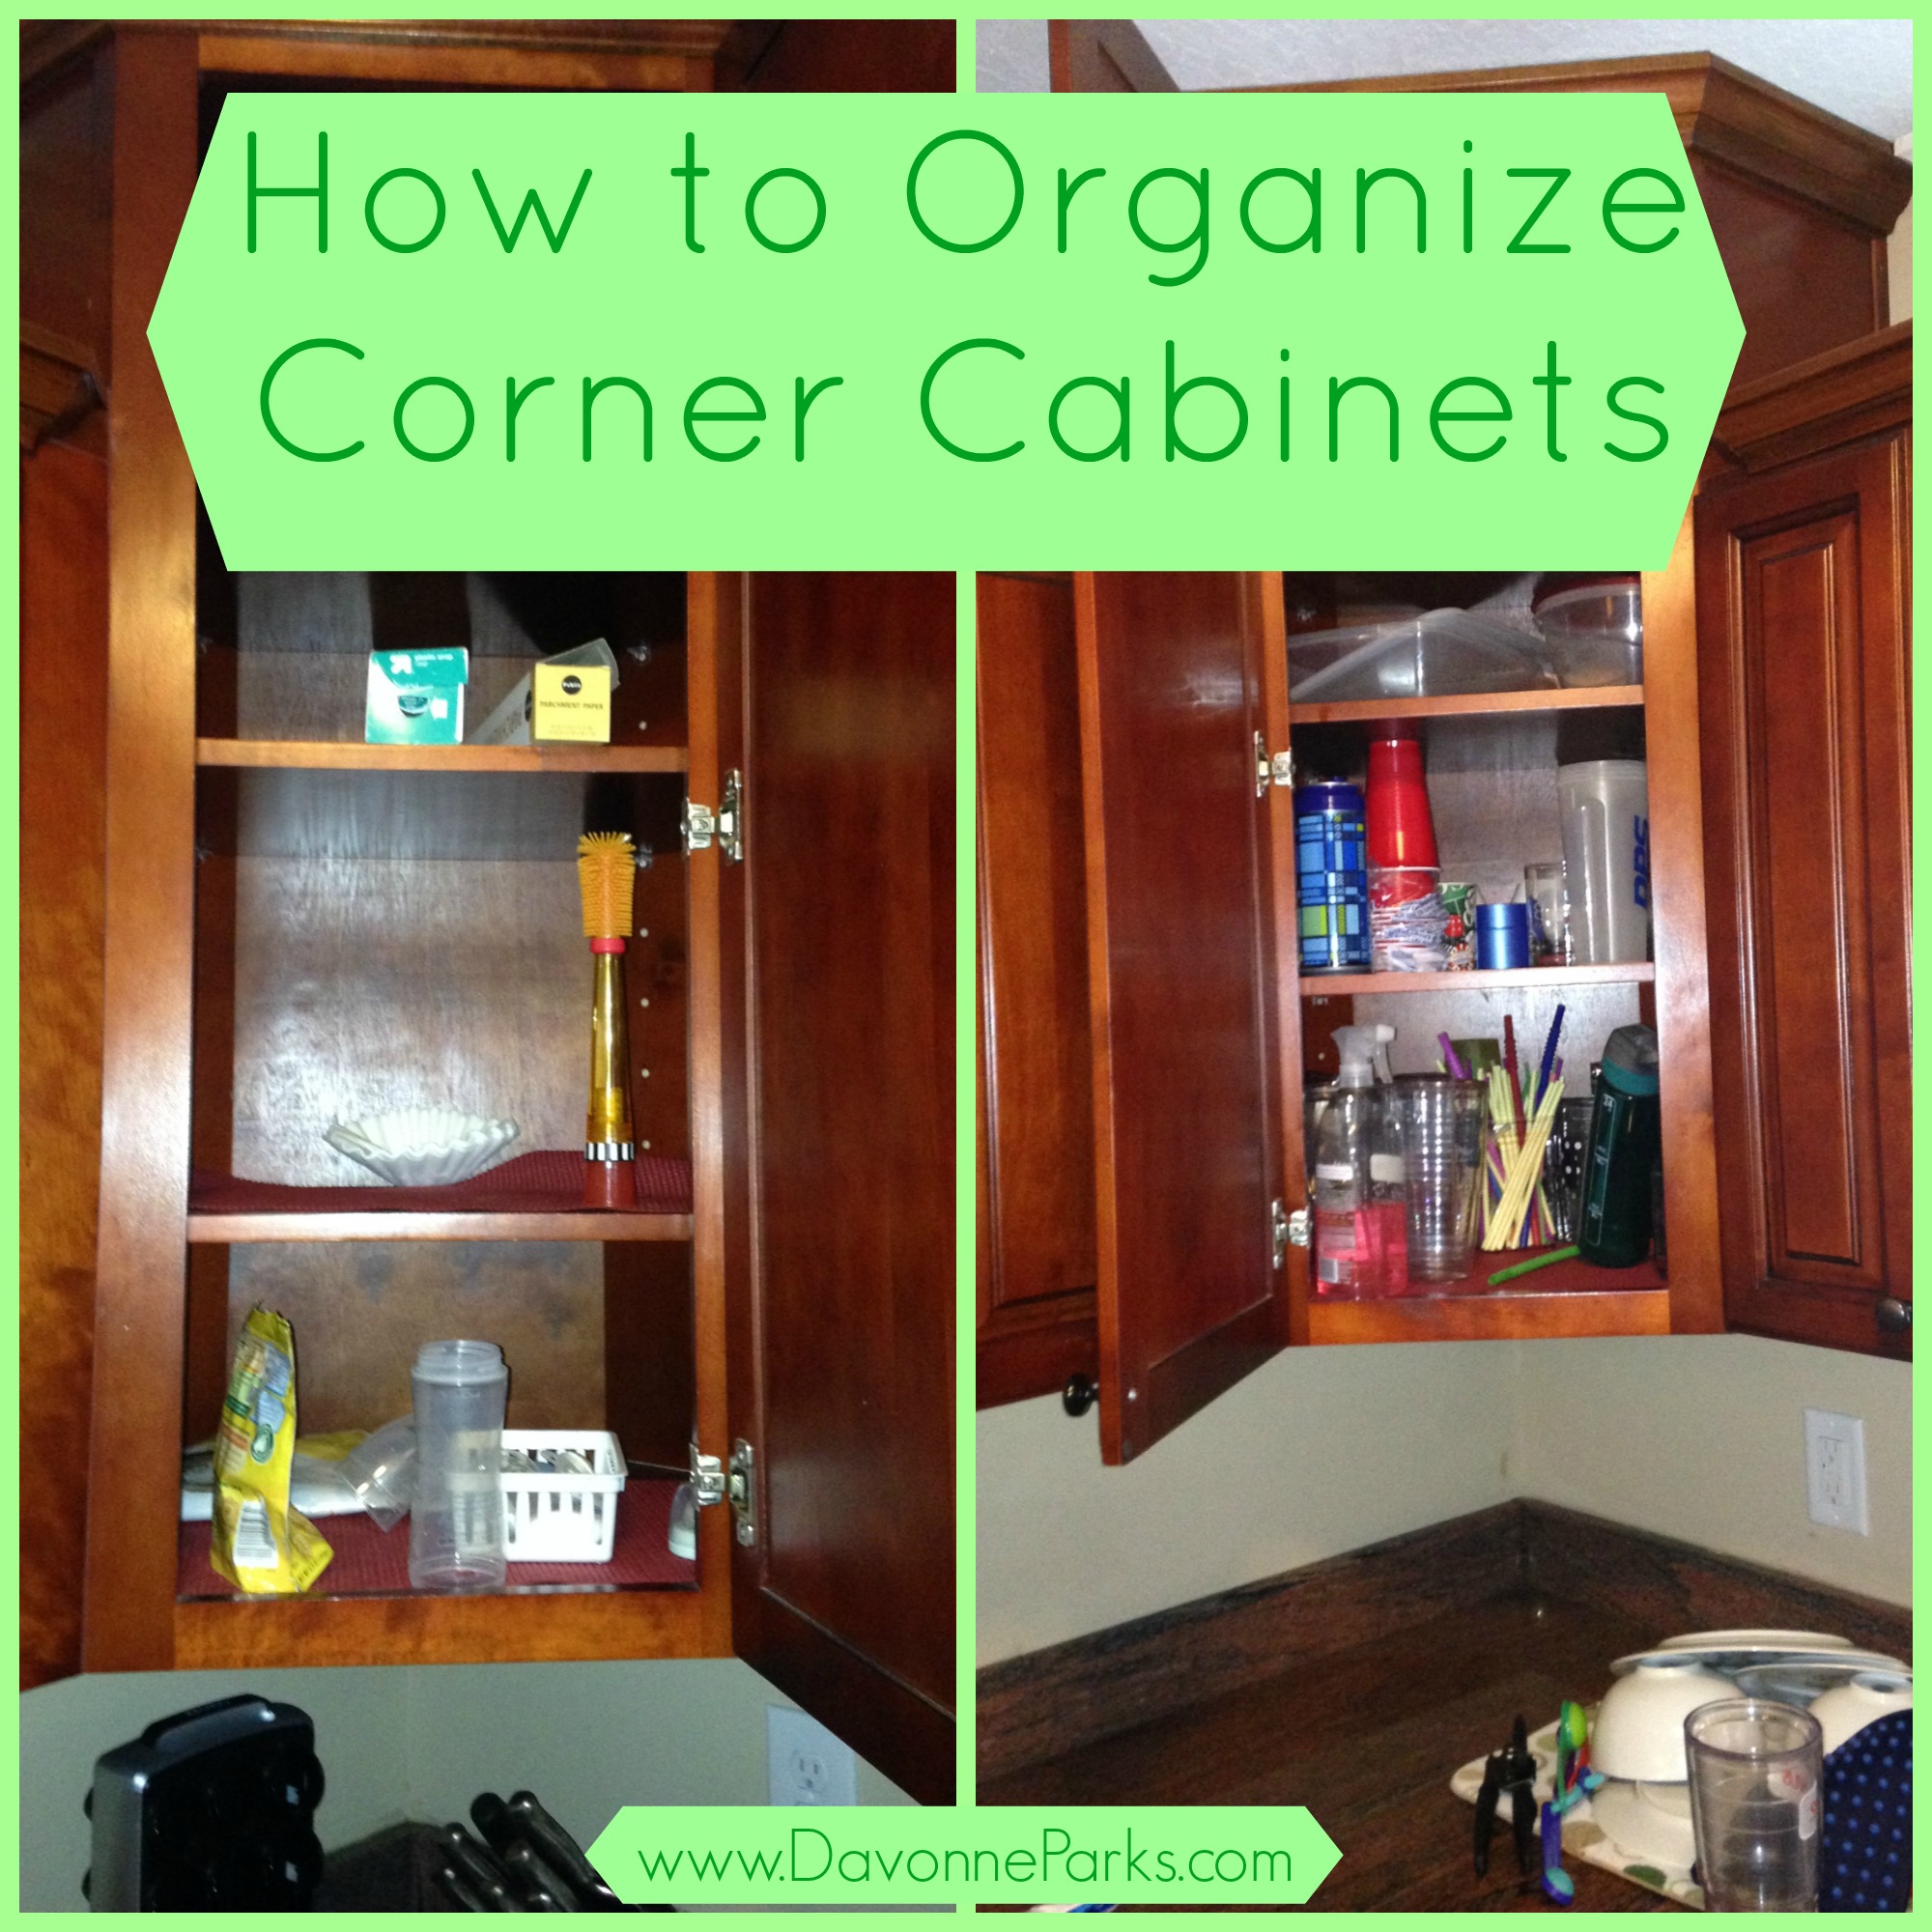 How to Organize Corner Cabinets – Davonne Parks